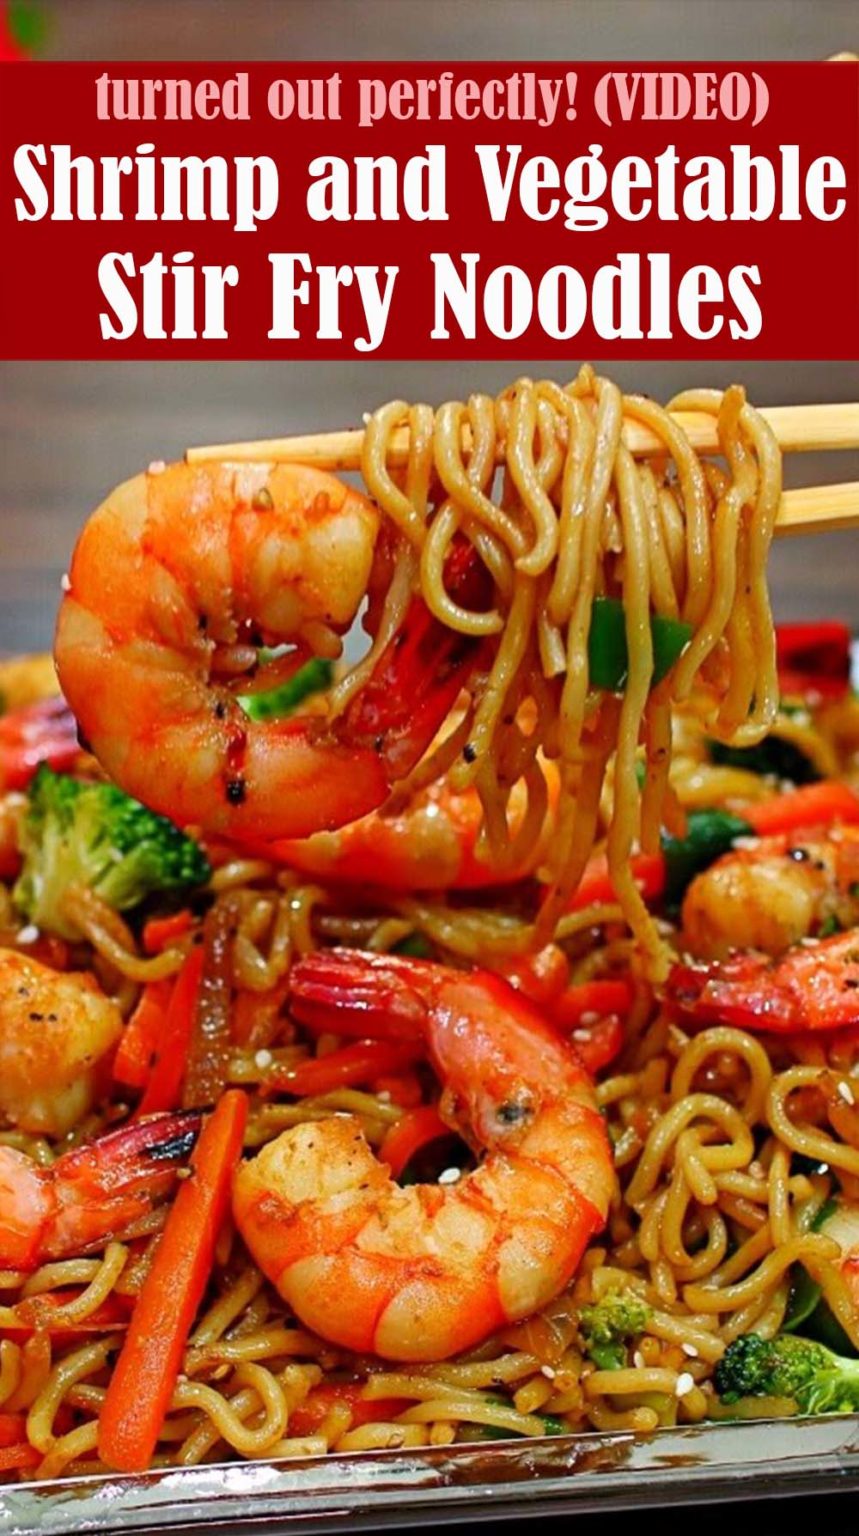 Shrimp and Vegetable Stir Fry Noodles Recipe with VIDEO – Reserveamana